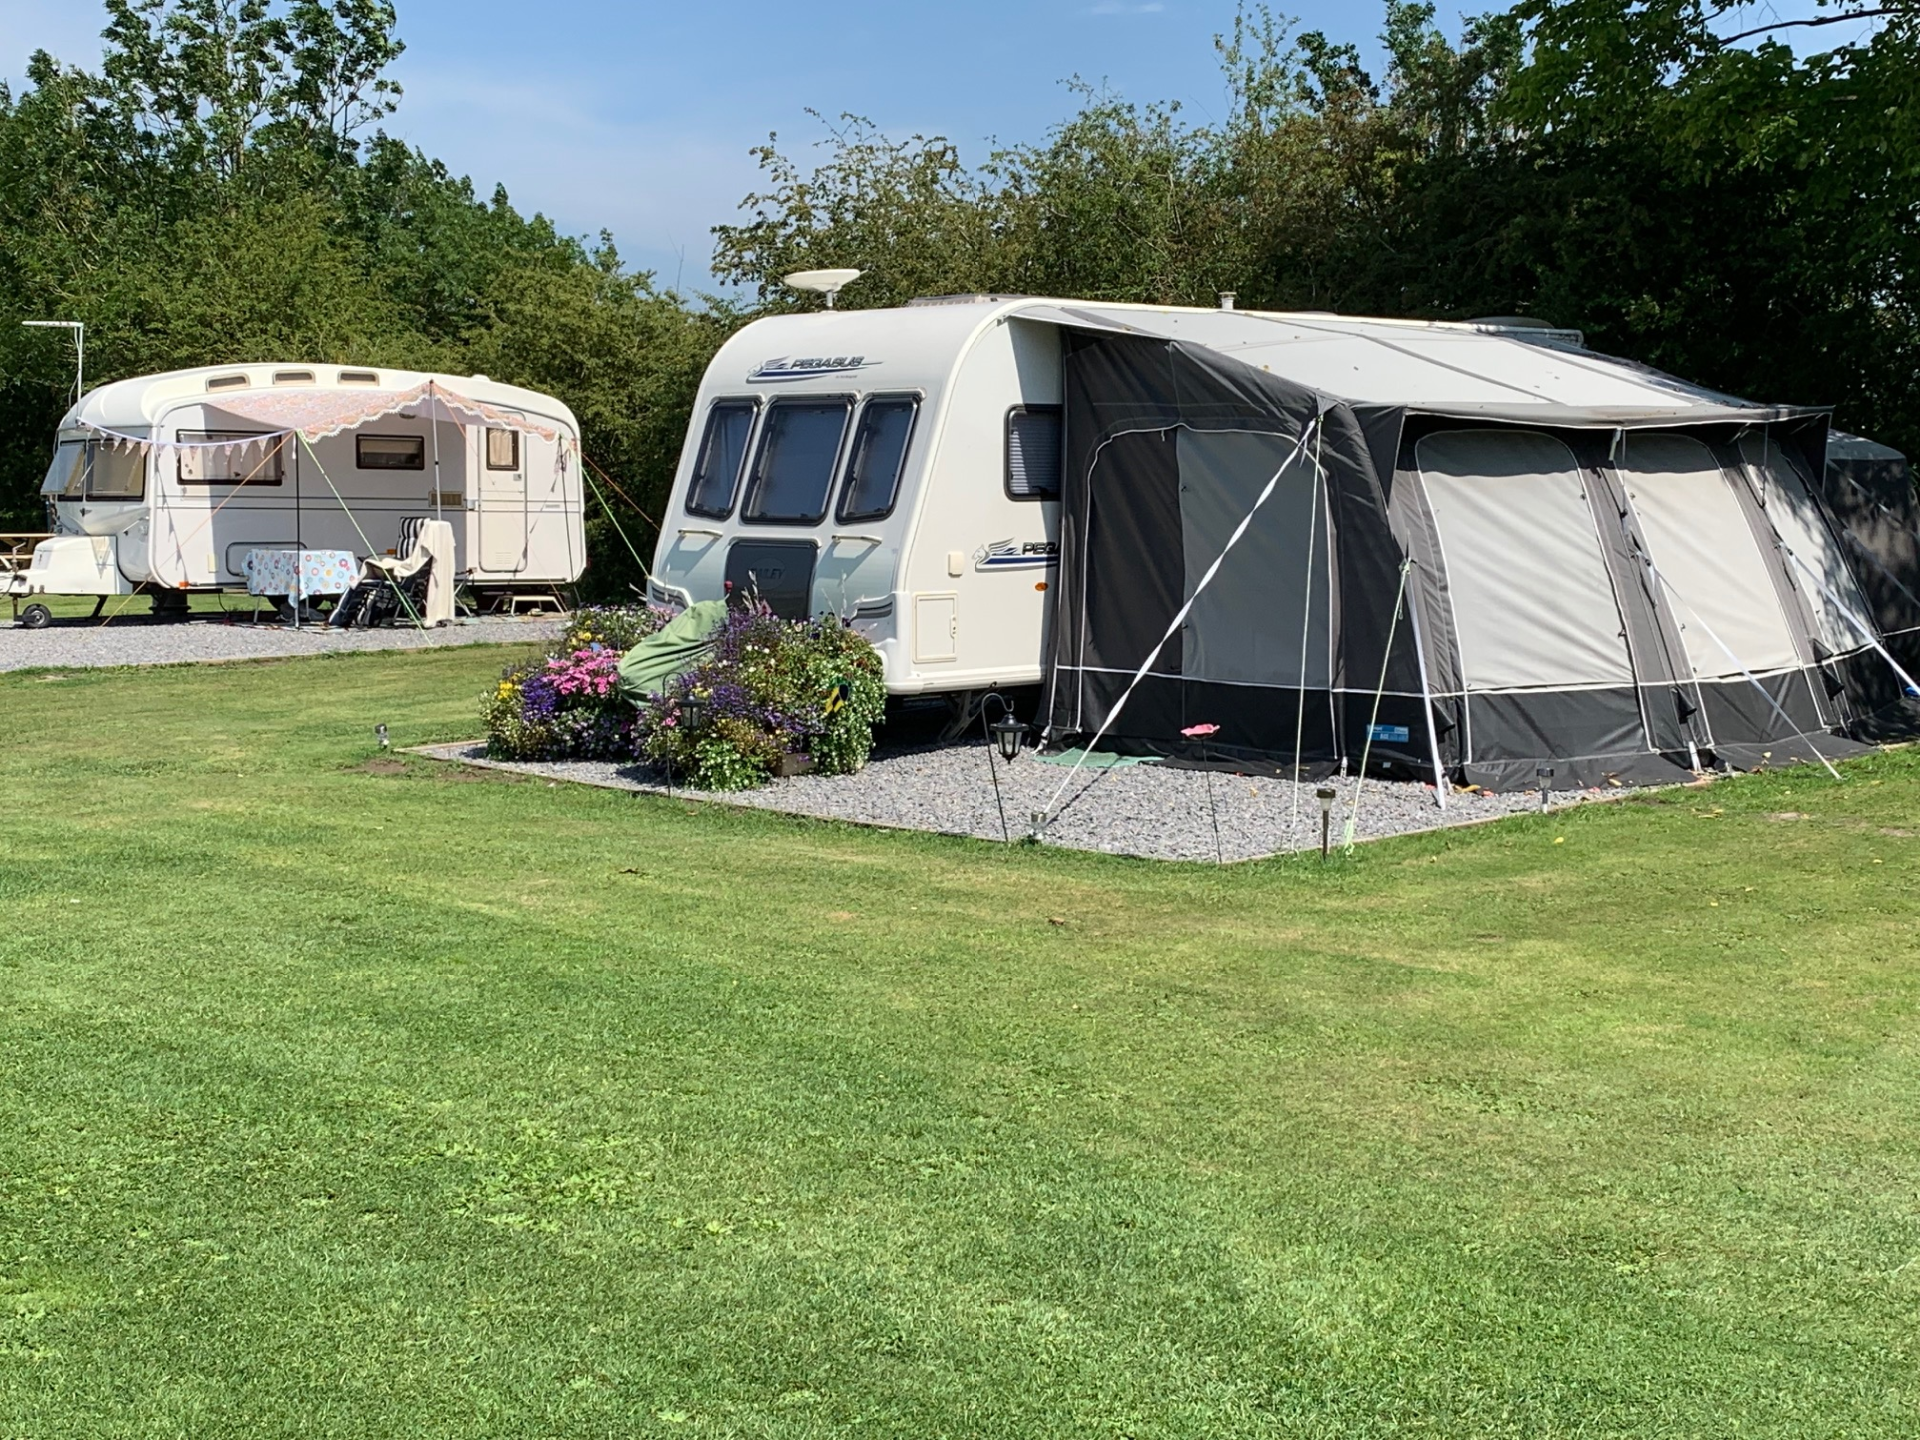 Caravan pitched with grey awning attached